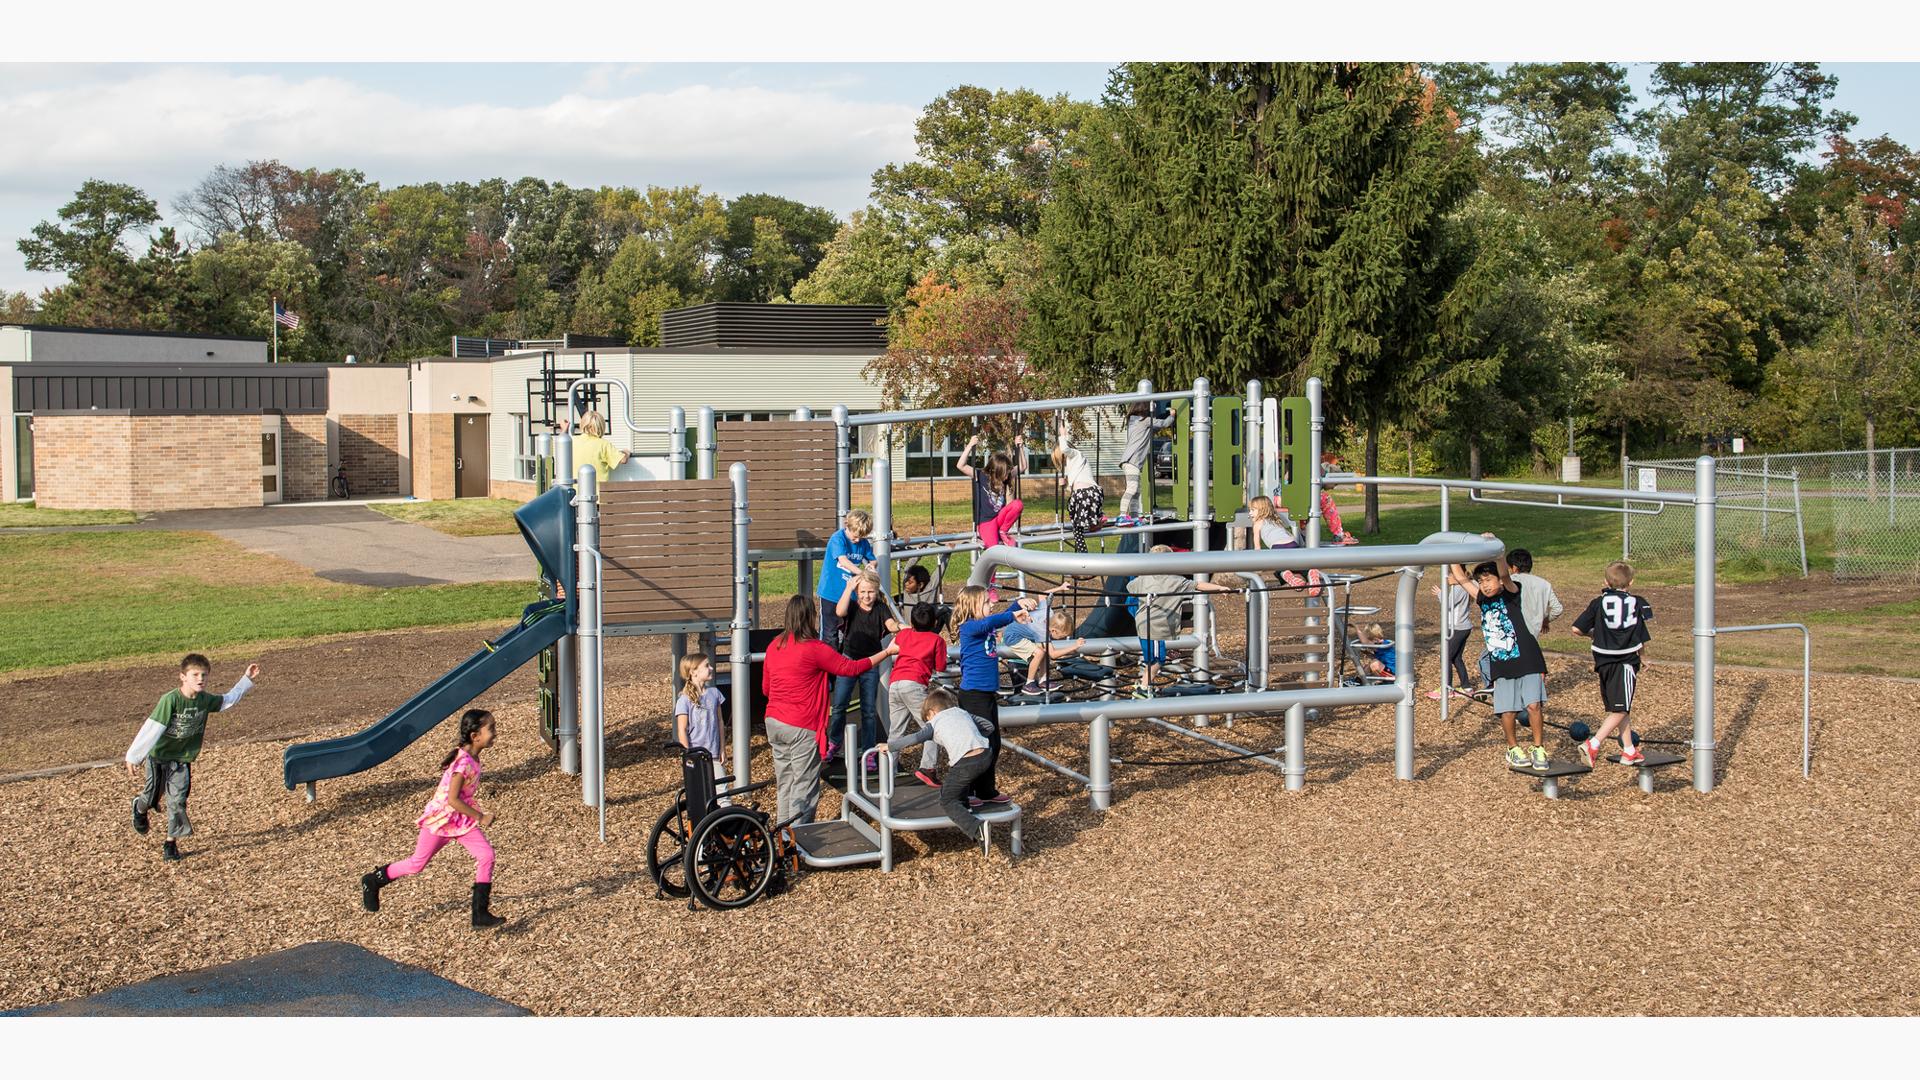 Children of all abilities play on a play structure with silver, navy blue coloring, and wood accents with unique rope climbers and a variety of overhead, climbing and play activities.